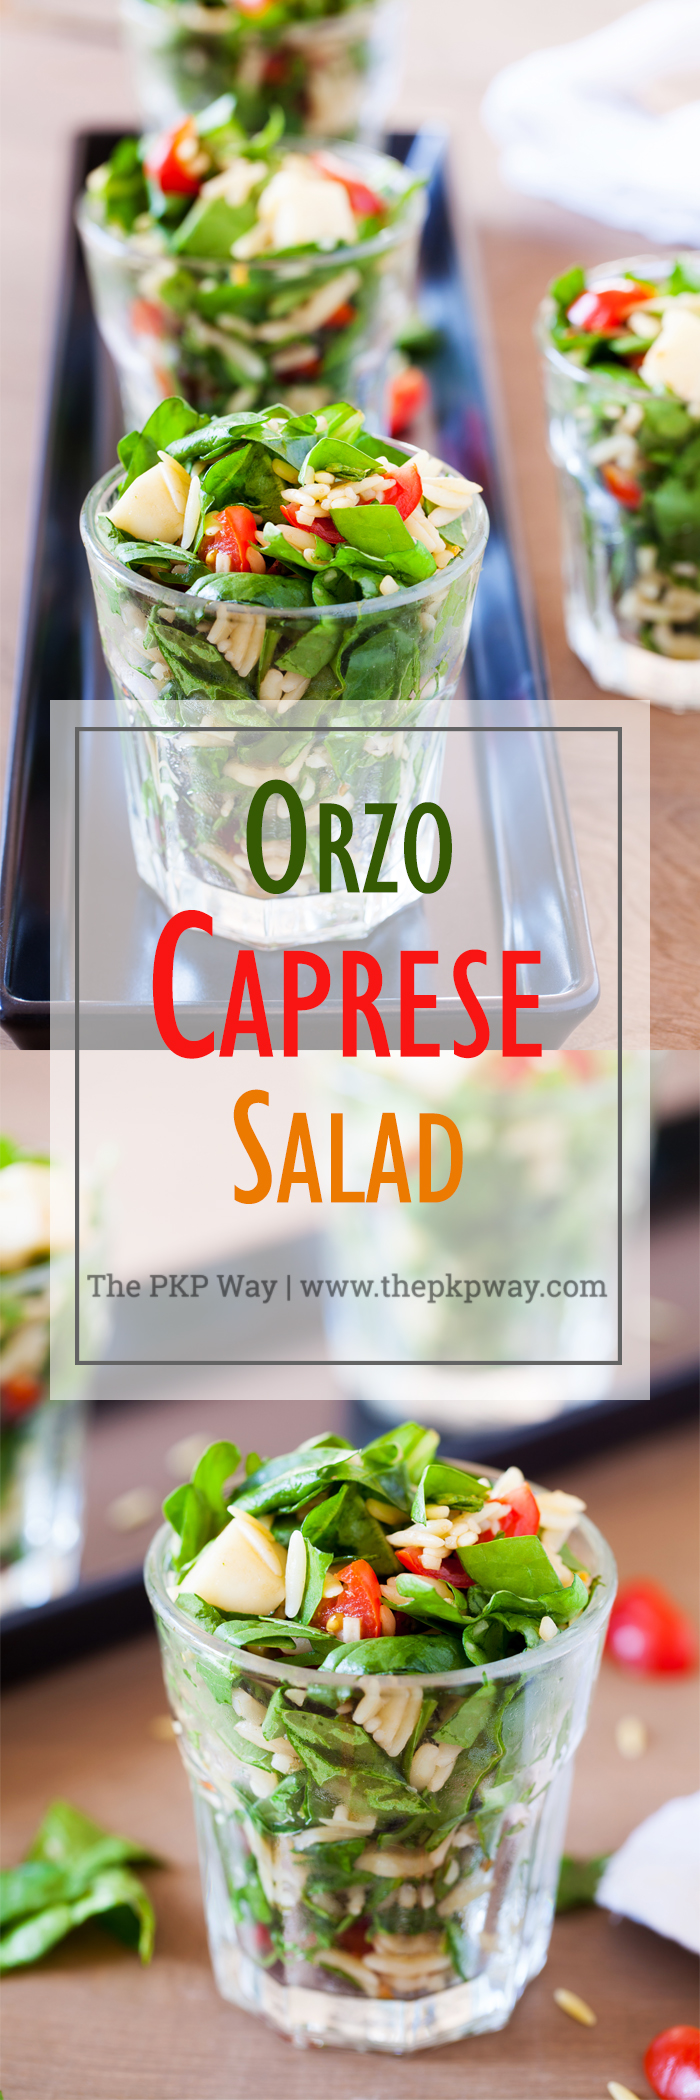 Classic caprese ingredients (basil, mozzarella, tomatoes, and balsamic vinaigrette) modernized into a salad with spinach and orzo pasta. 